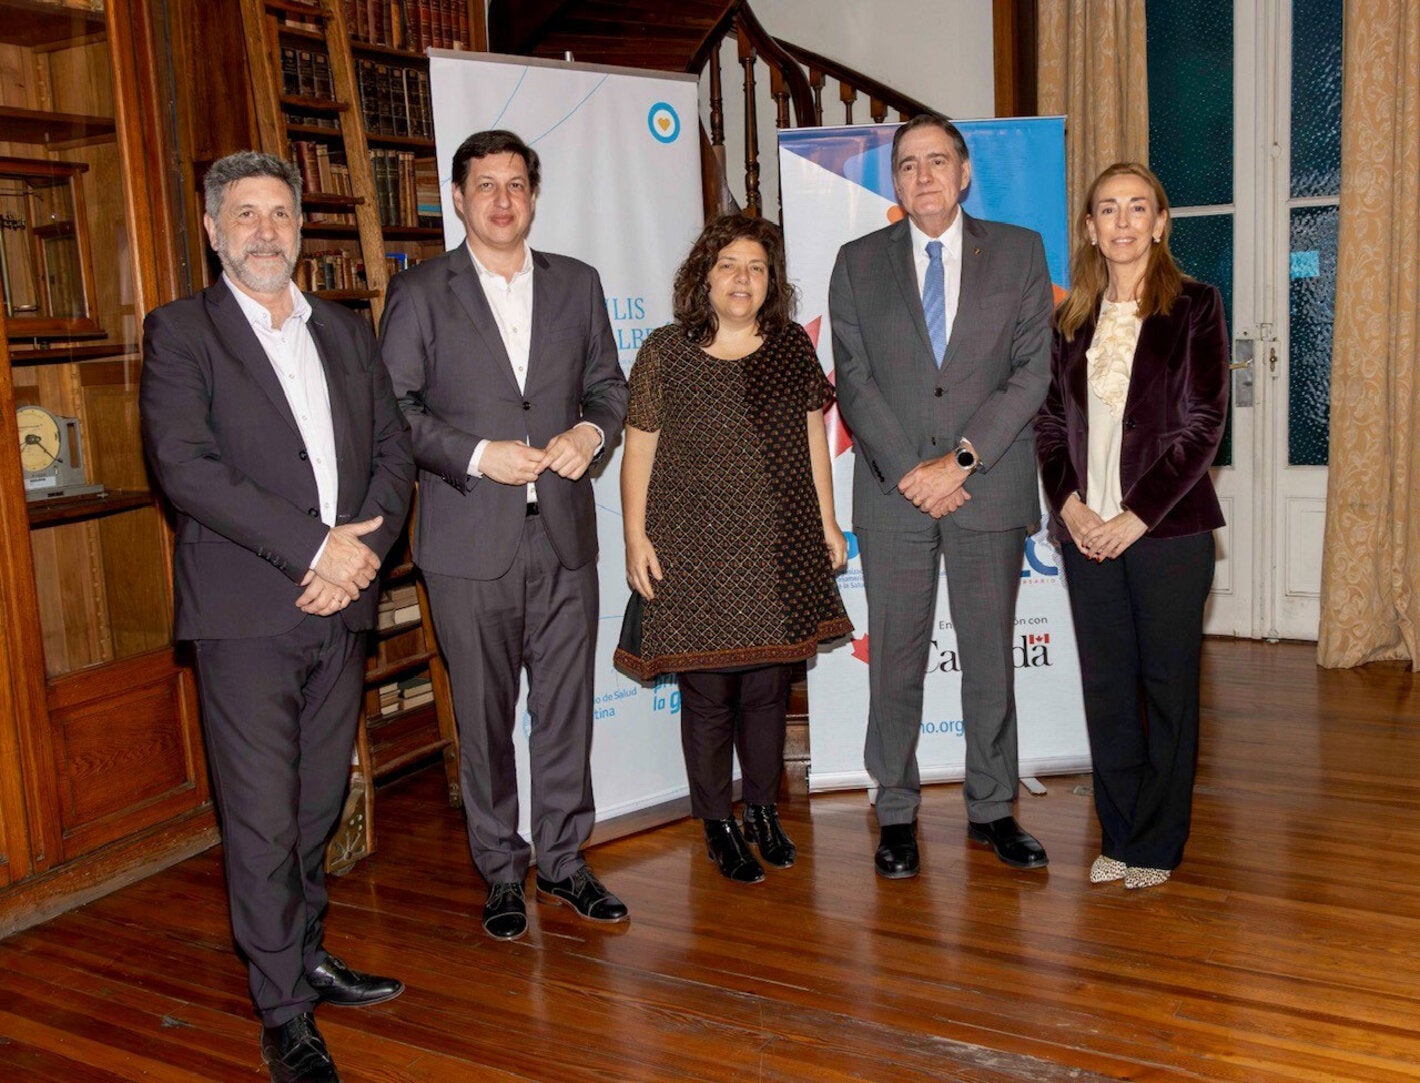 The Director of the Pan American Health Organization (PAHO), Dr. Jarbas Barbosa today signed a new agreement with Argentine health, science and technology authorities to strengthen and increase capacities for the development and future production of mRNA vaccines for regional use.